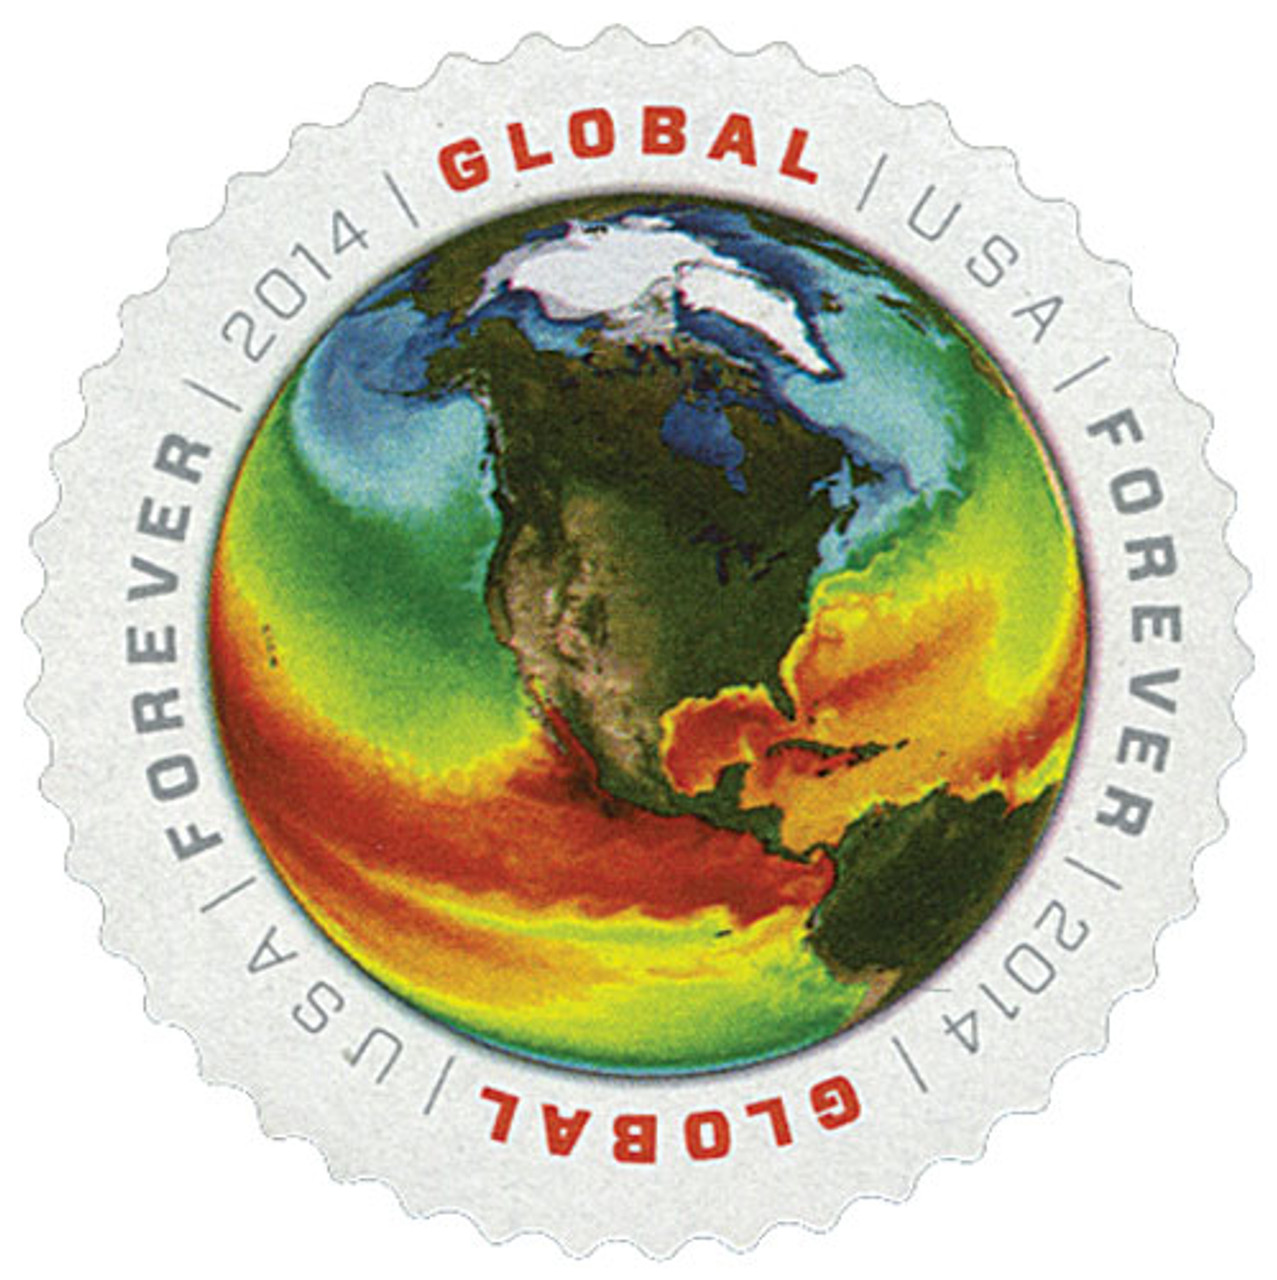 5058 - 2016 Global Forever Stamp - The Moon - Mystic Stamp Company